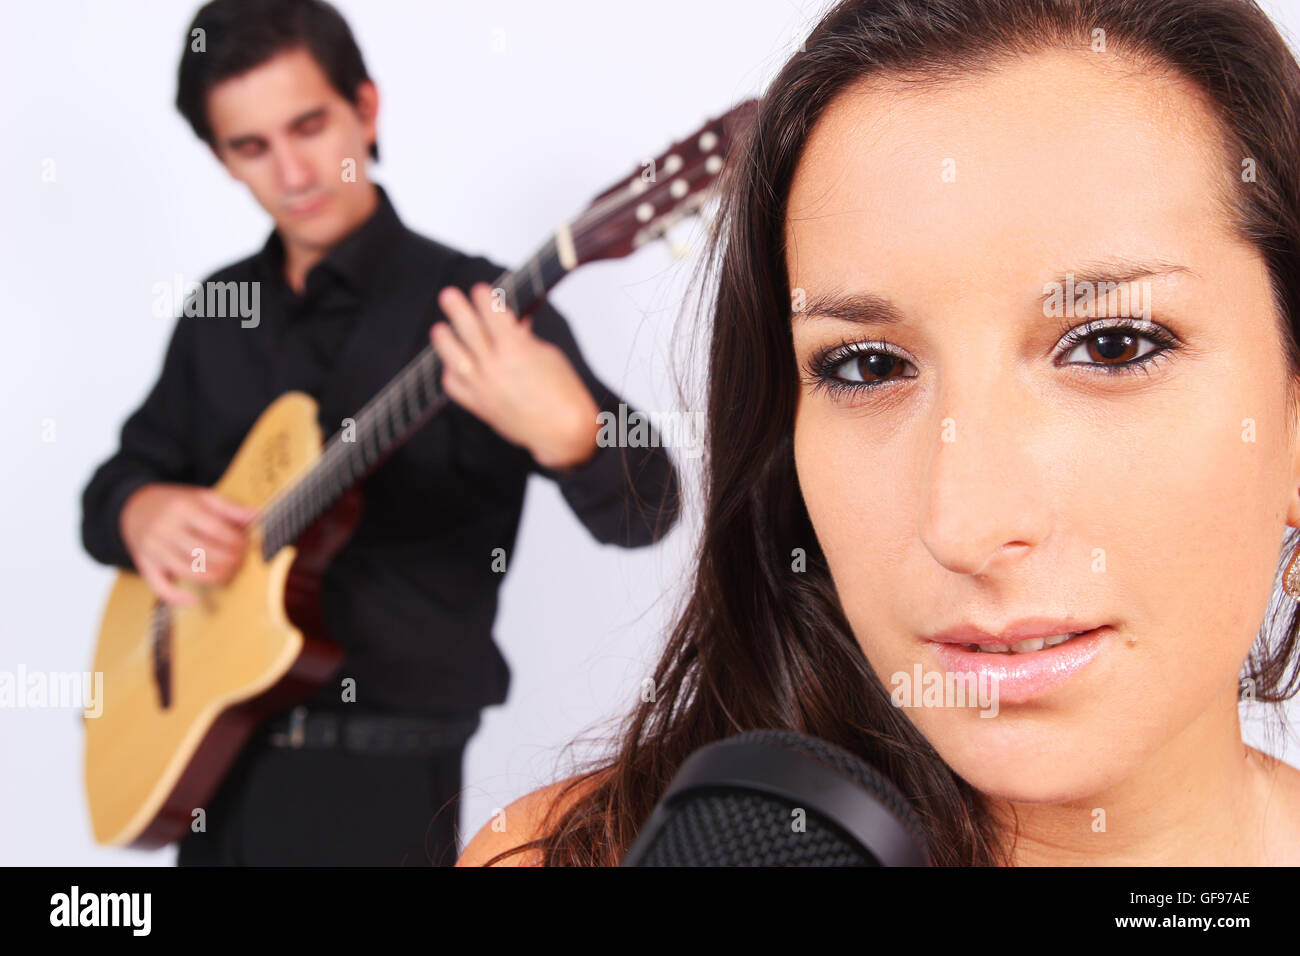 A female singer and a male guitarrist in action in white background Stock Photo